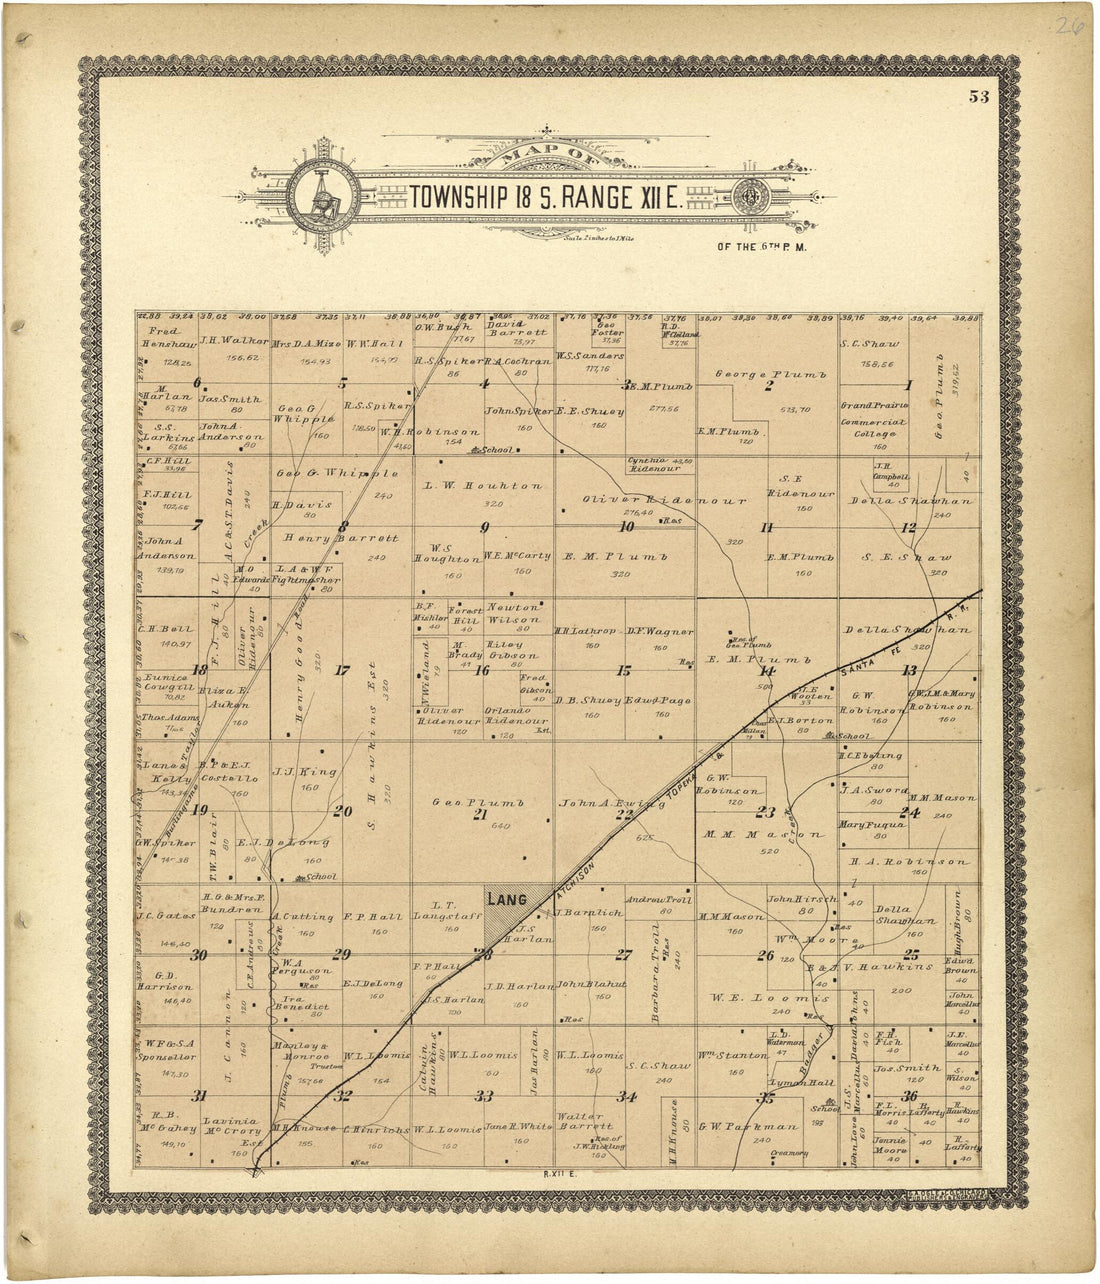 This old map of Map of Township 18 S. Range XII E. from Standard Atlas of Lyon County, Kansas from 1901 was created by  Geo. A. Ogle &amp; Co in 1901